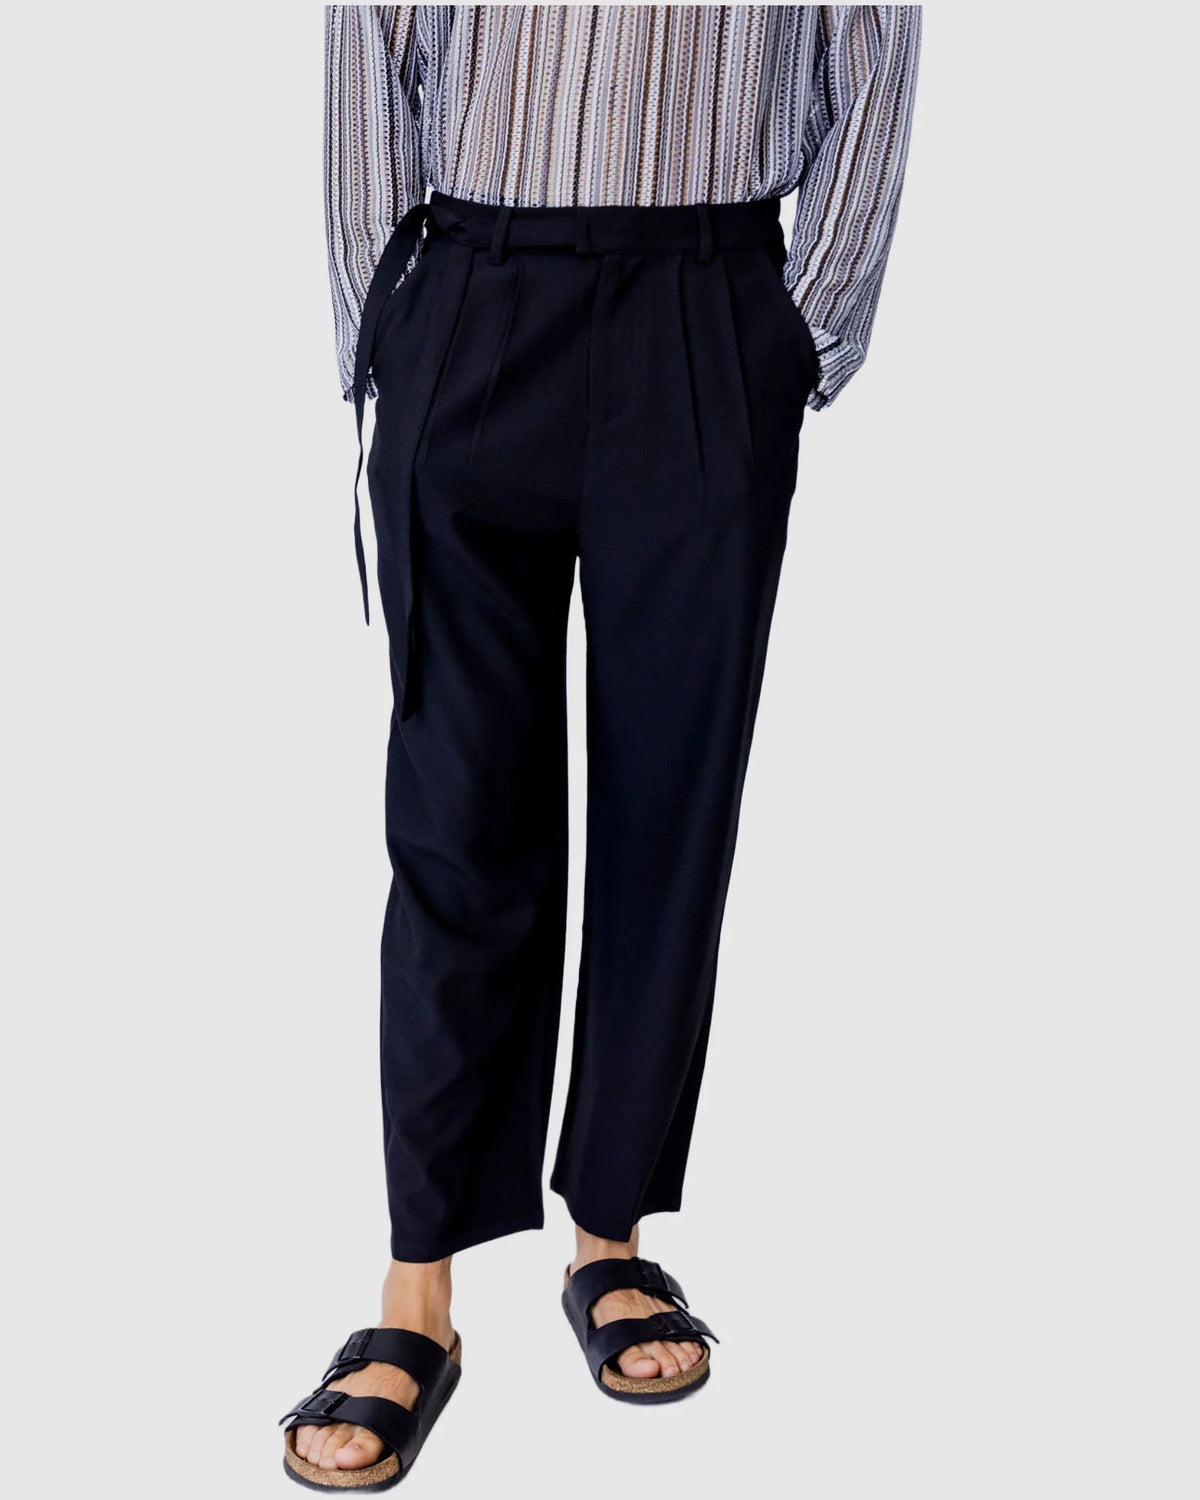 Justin Cassin Liberty Loose Tie Pants in Black Color